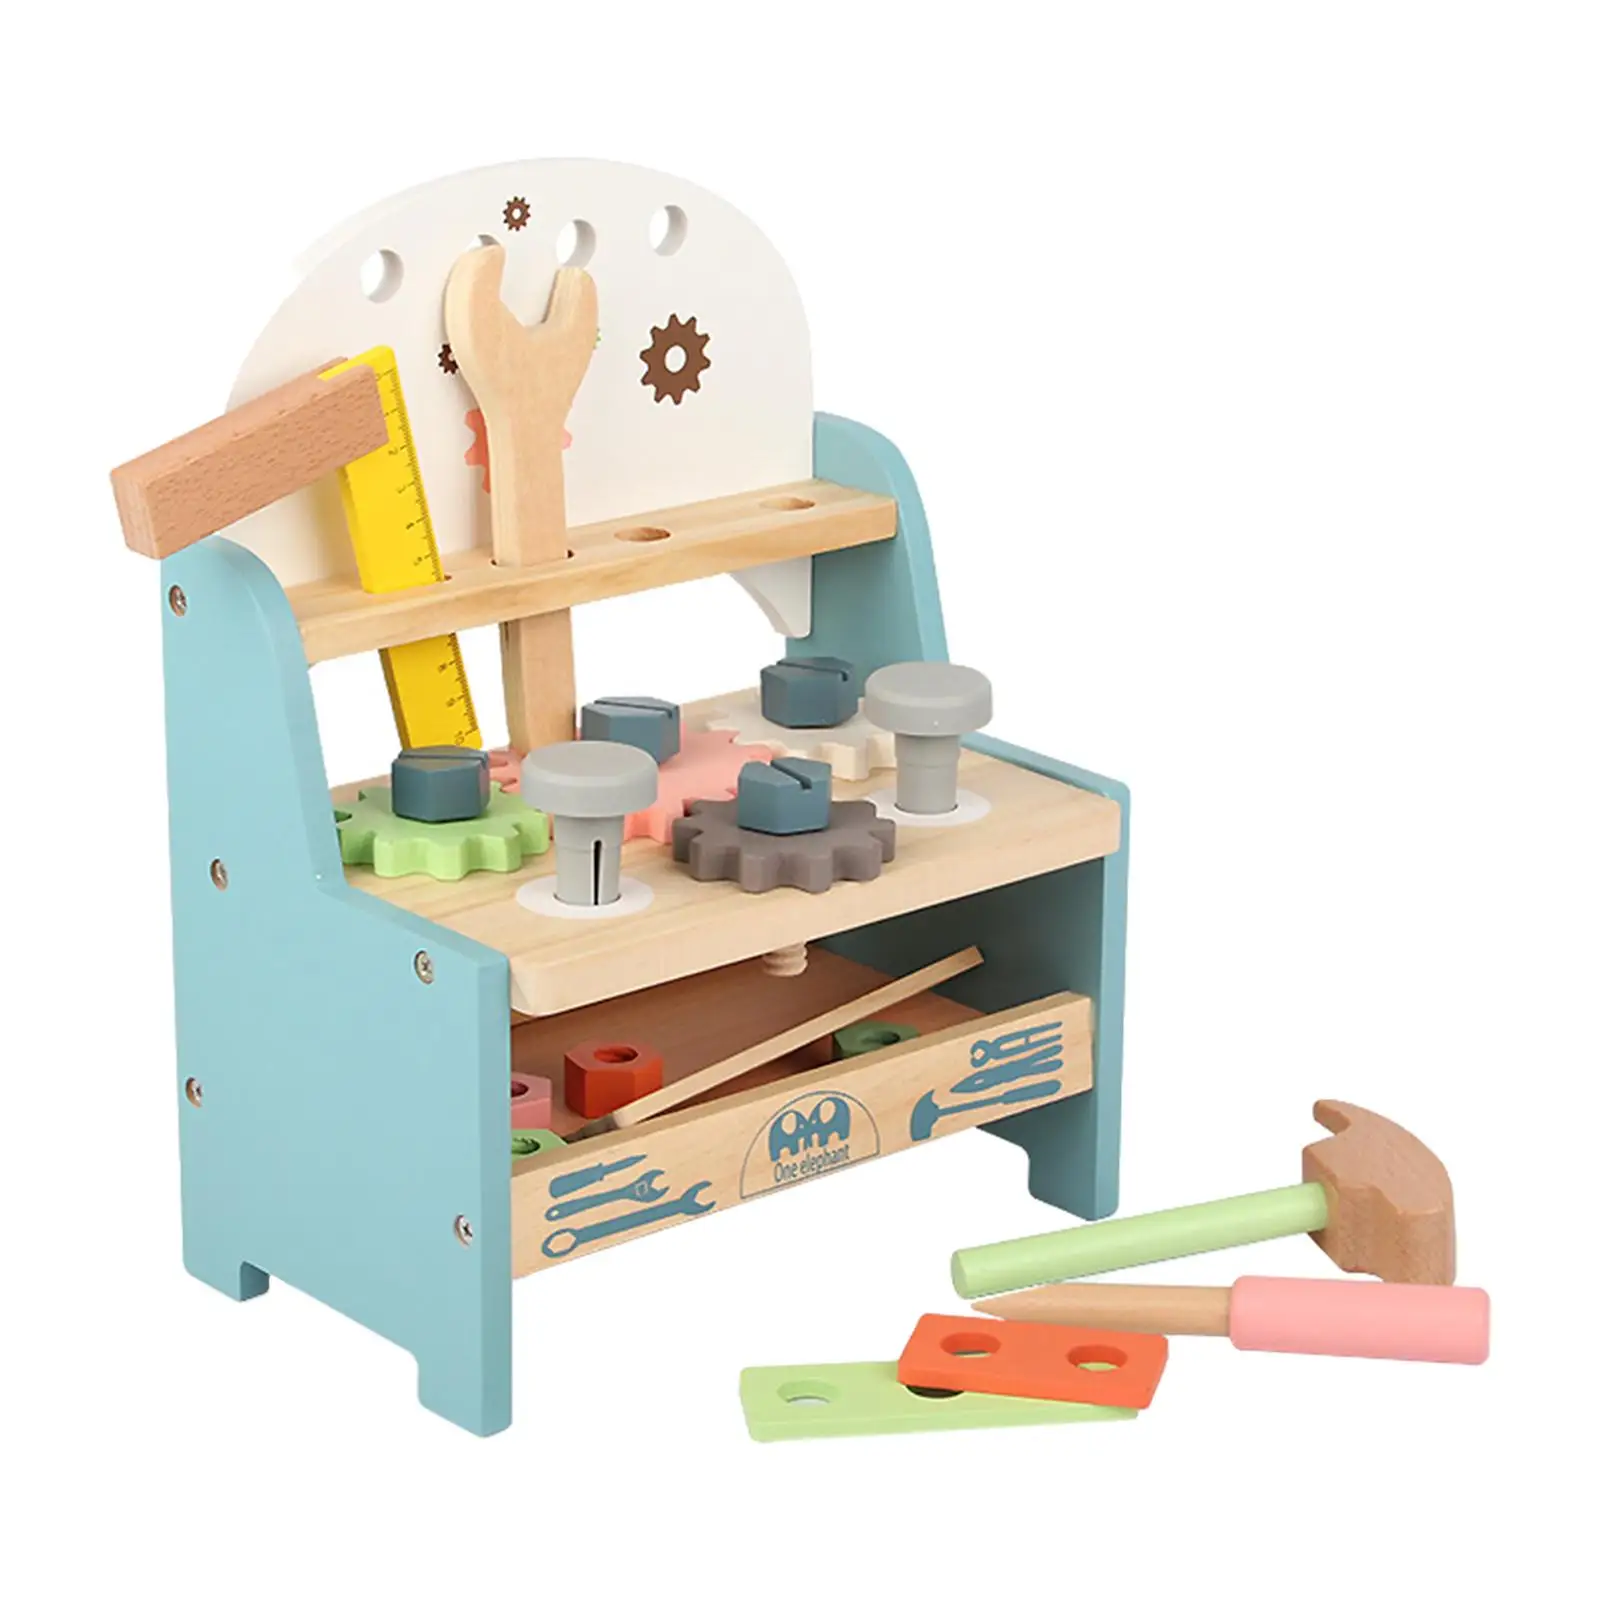 Wooden Simulation Woodworking Workshop Equipment, Hummer, Tool Toys